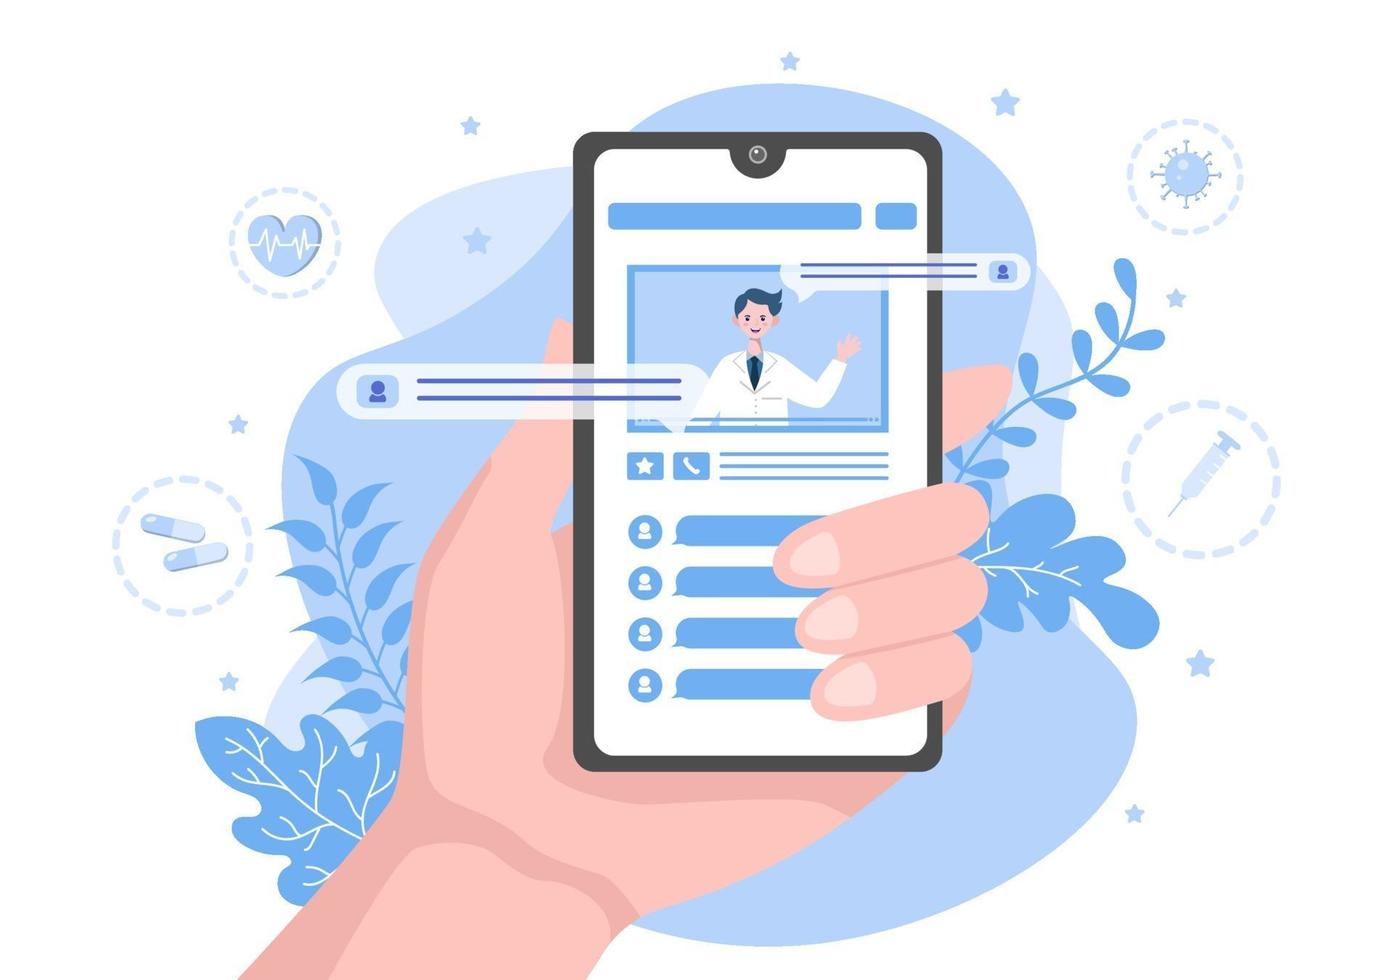 Online Healthcare and Medical Concept of Doctor Vector Illustration, Medicine Consultation and Treatment via Application of Smartphone or Computer Connected Internet Clinic